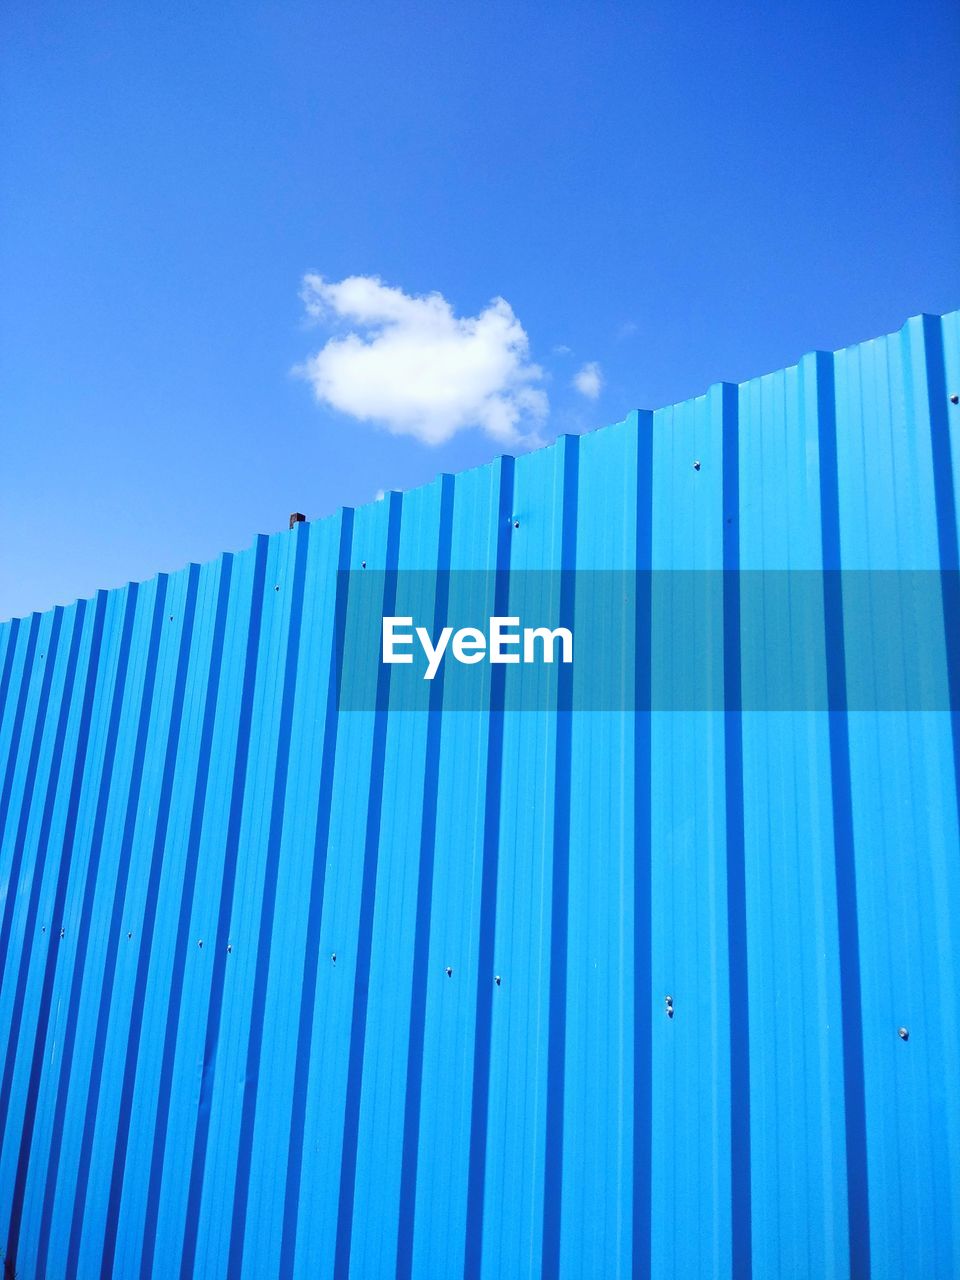 LOW ANGLE VIEW OF METALLIC STRUCTURE AGAINST BLUE SKY AND FENCE